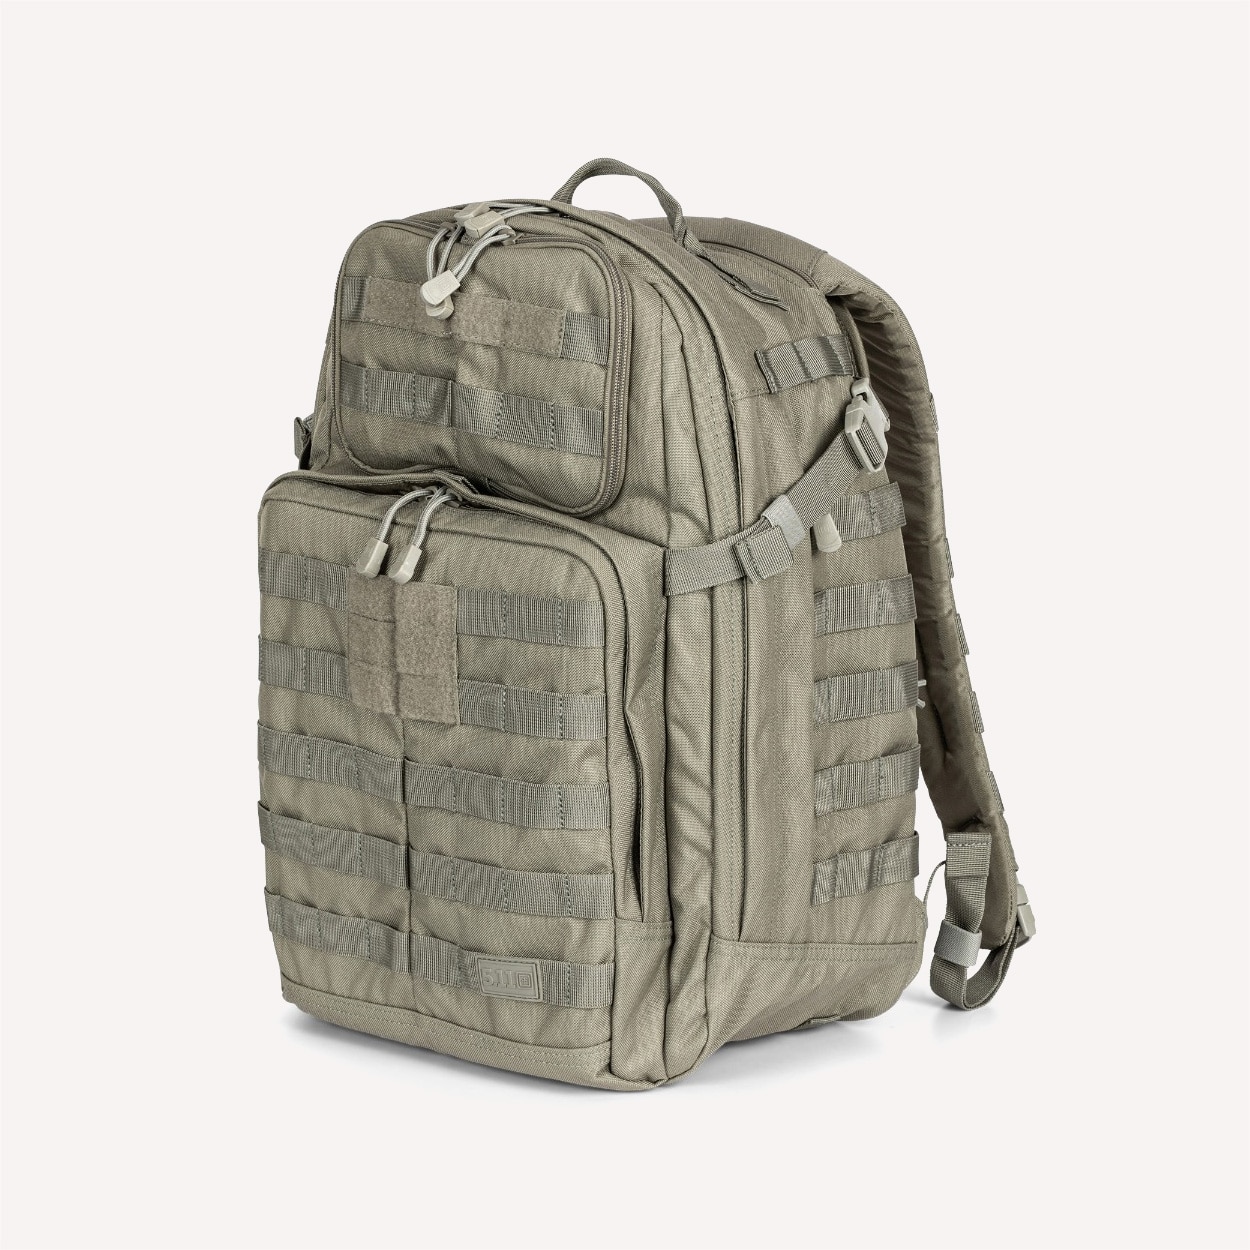 RUSH24 2.0 BACKPACK 37L LIMITED EDITION PYTHON COLOR